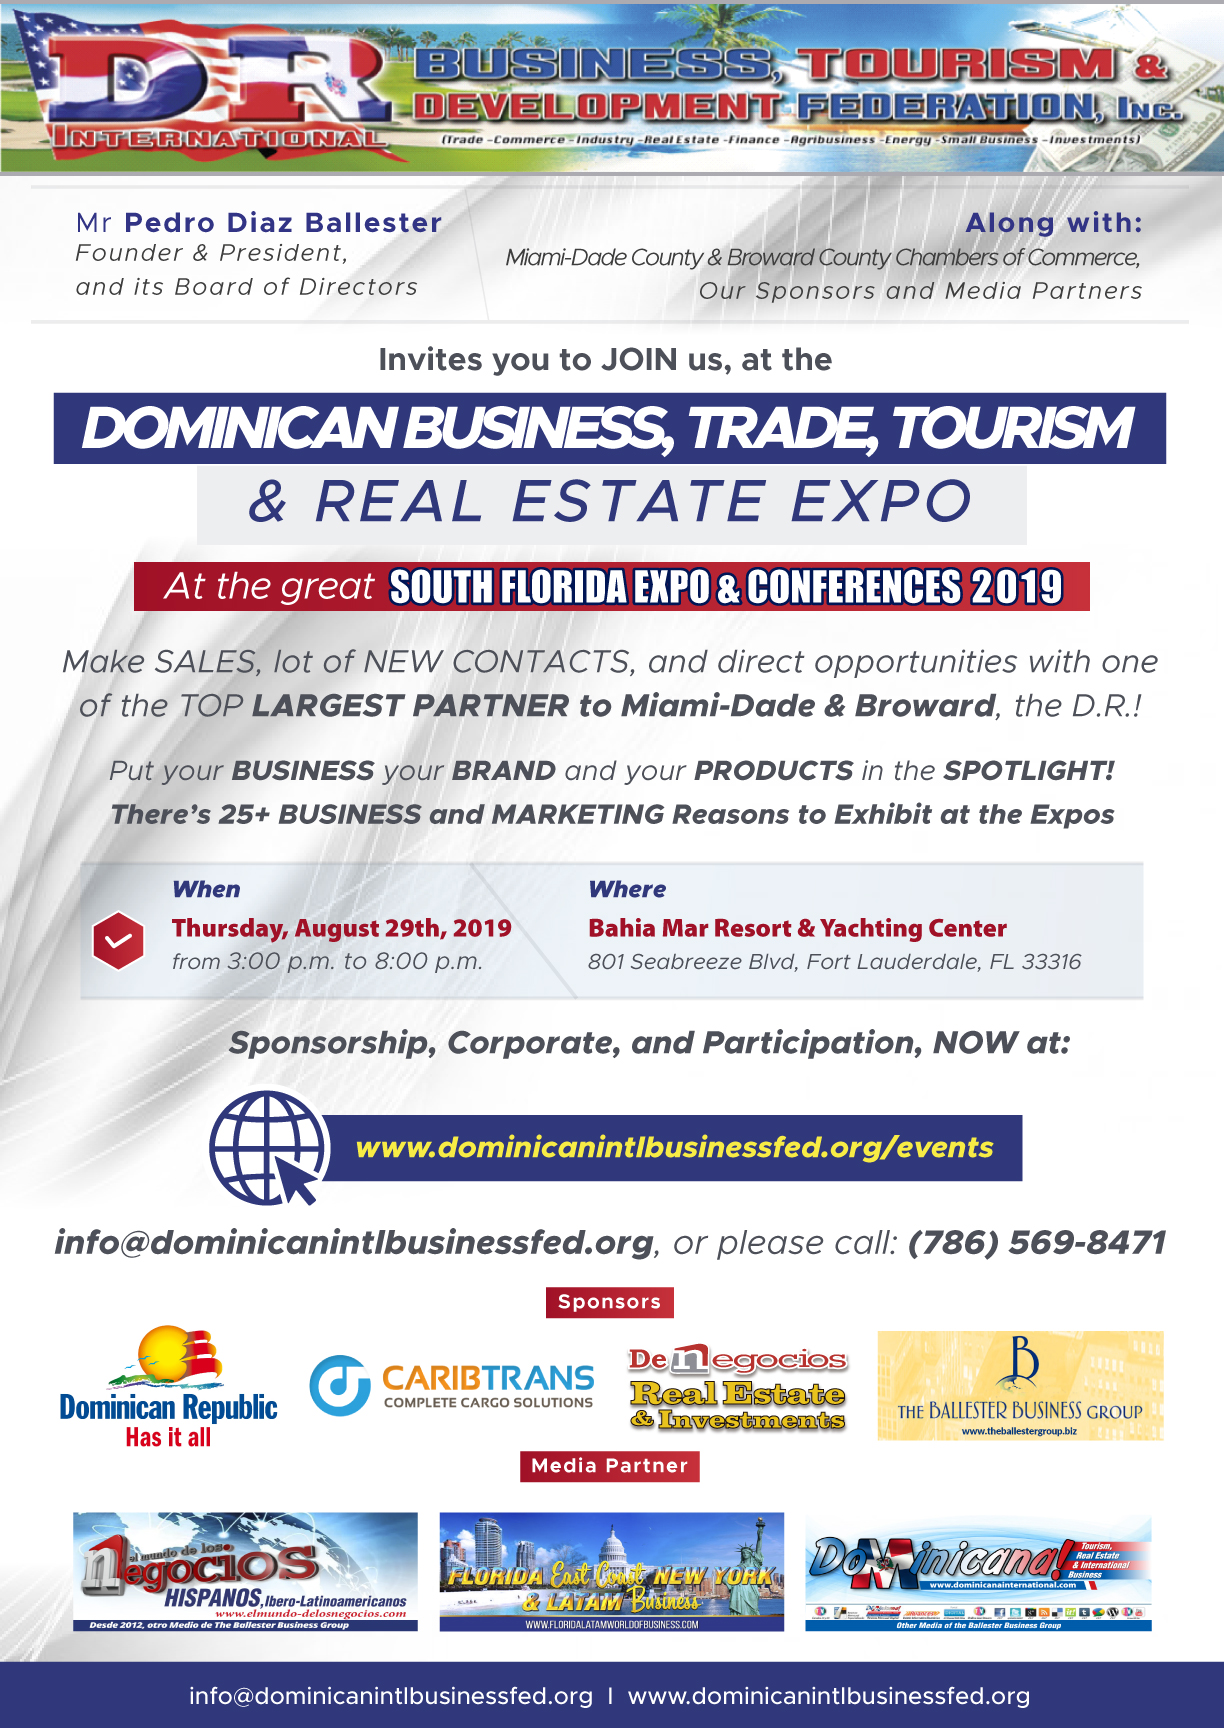 DOMINICAN BUSINESS, TRADE, TOURISM